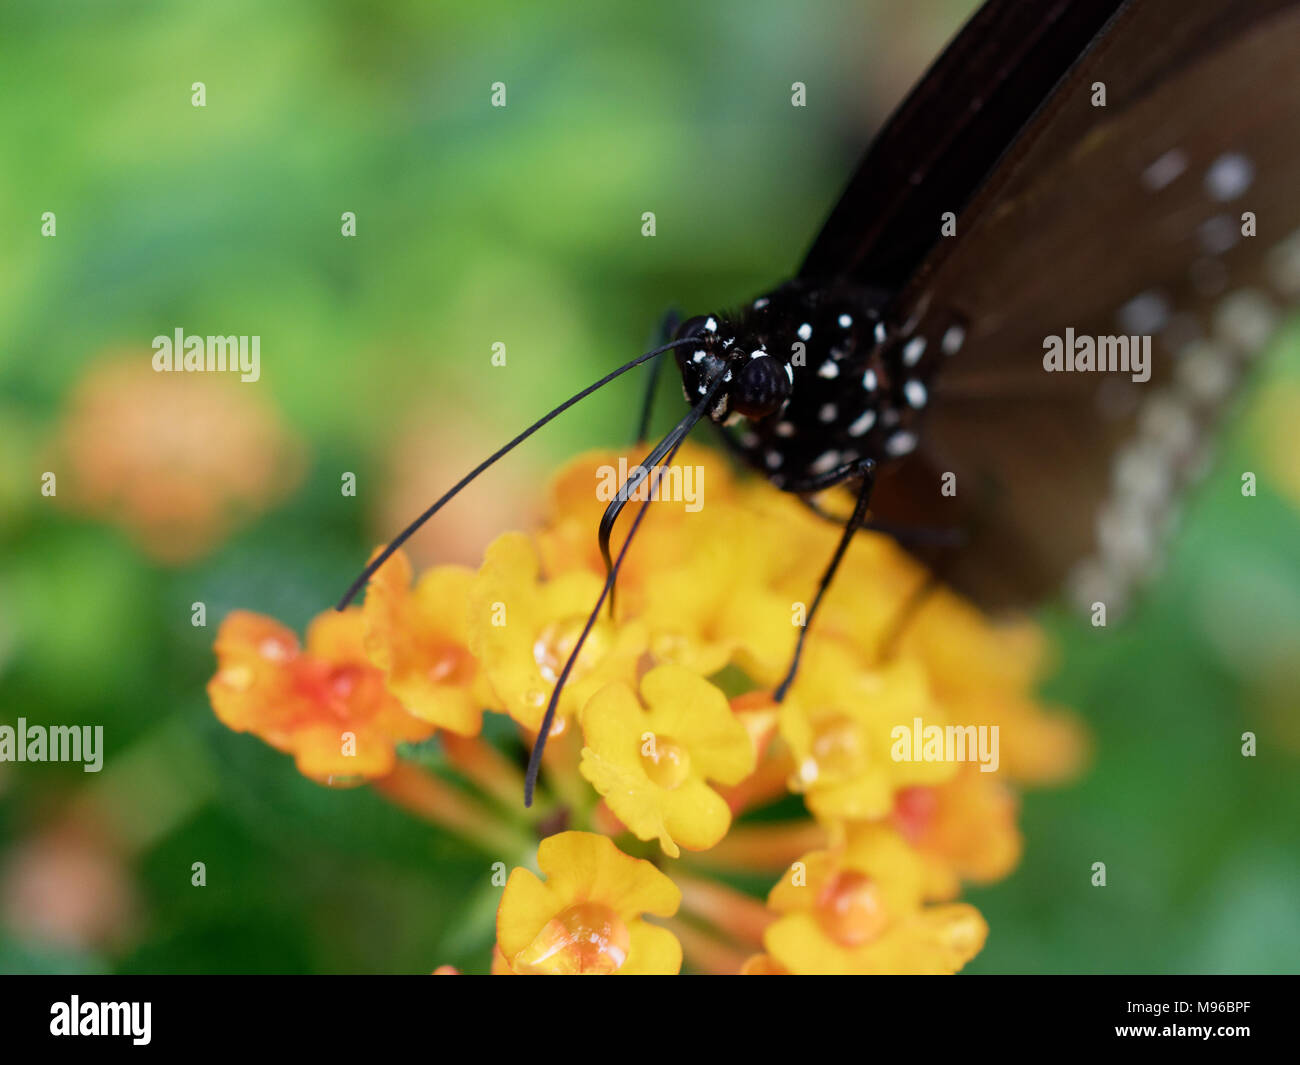 Black butterfly with white spot in close up sucking nectar or juice of yellow blossom flower over green leaf background in a garden Stock Photo